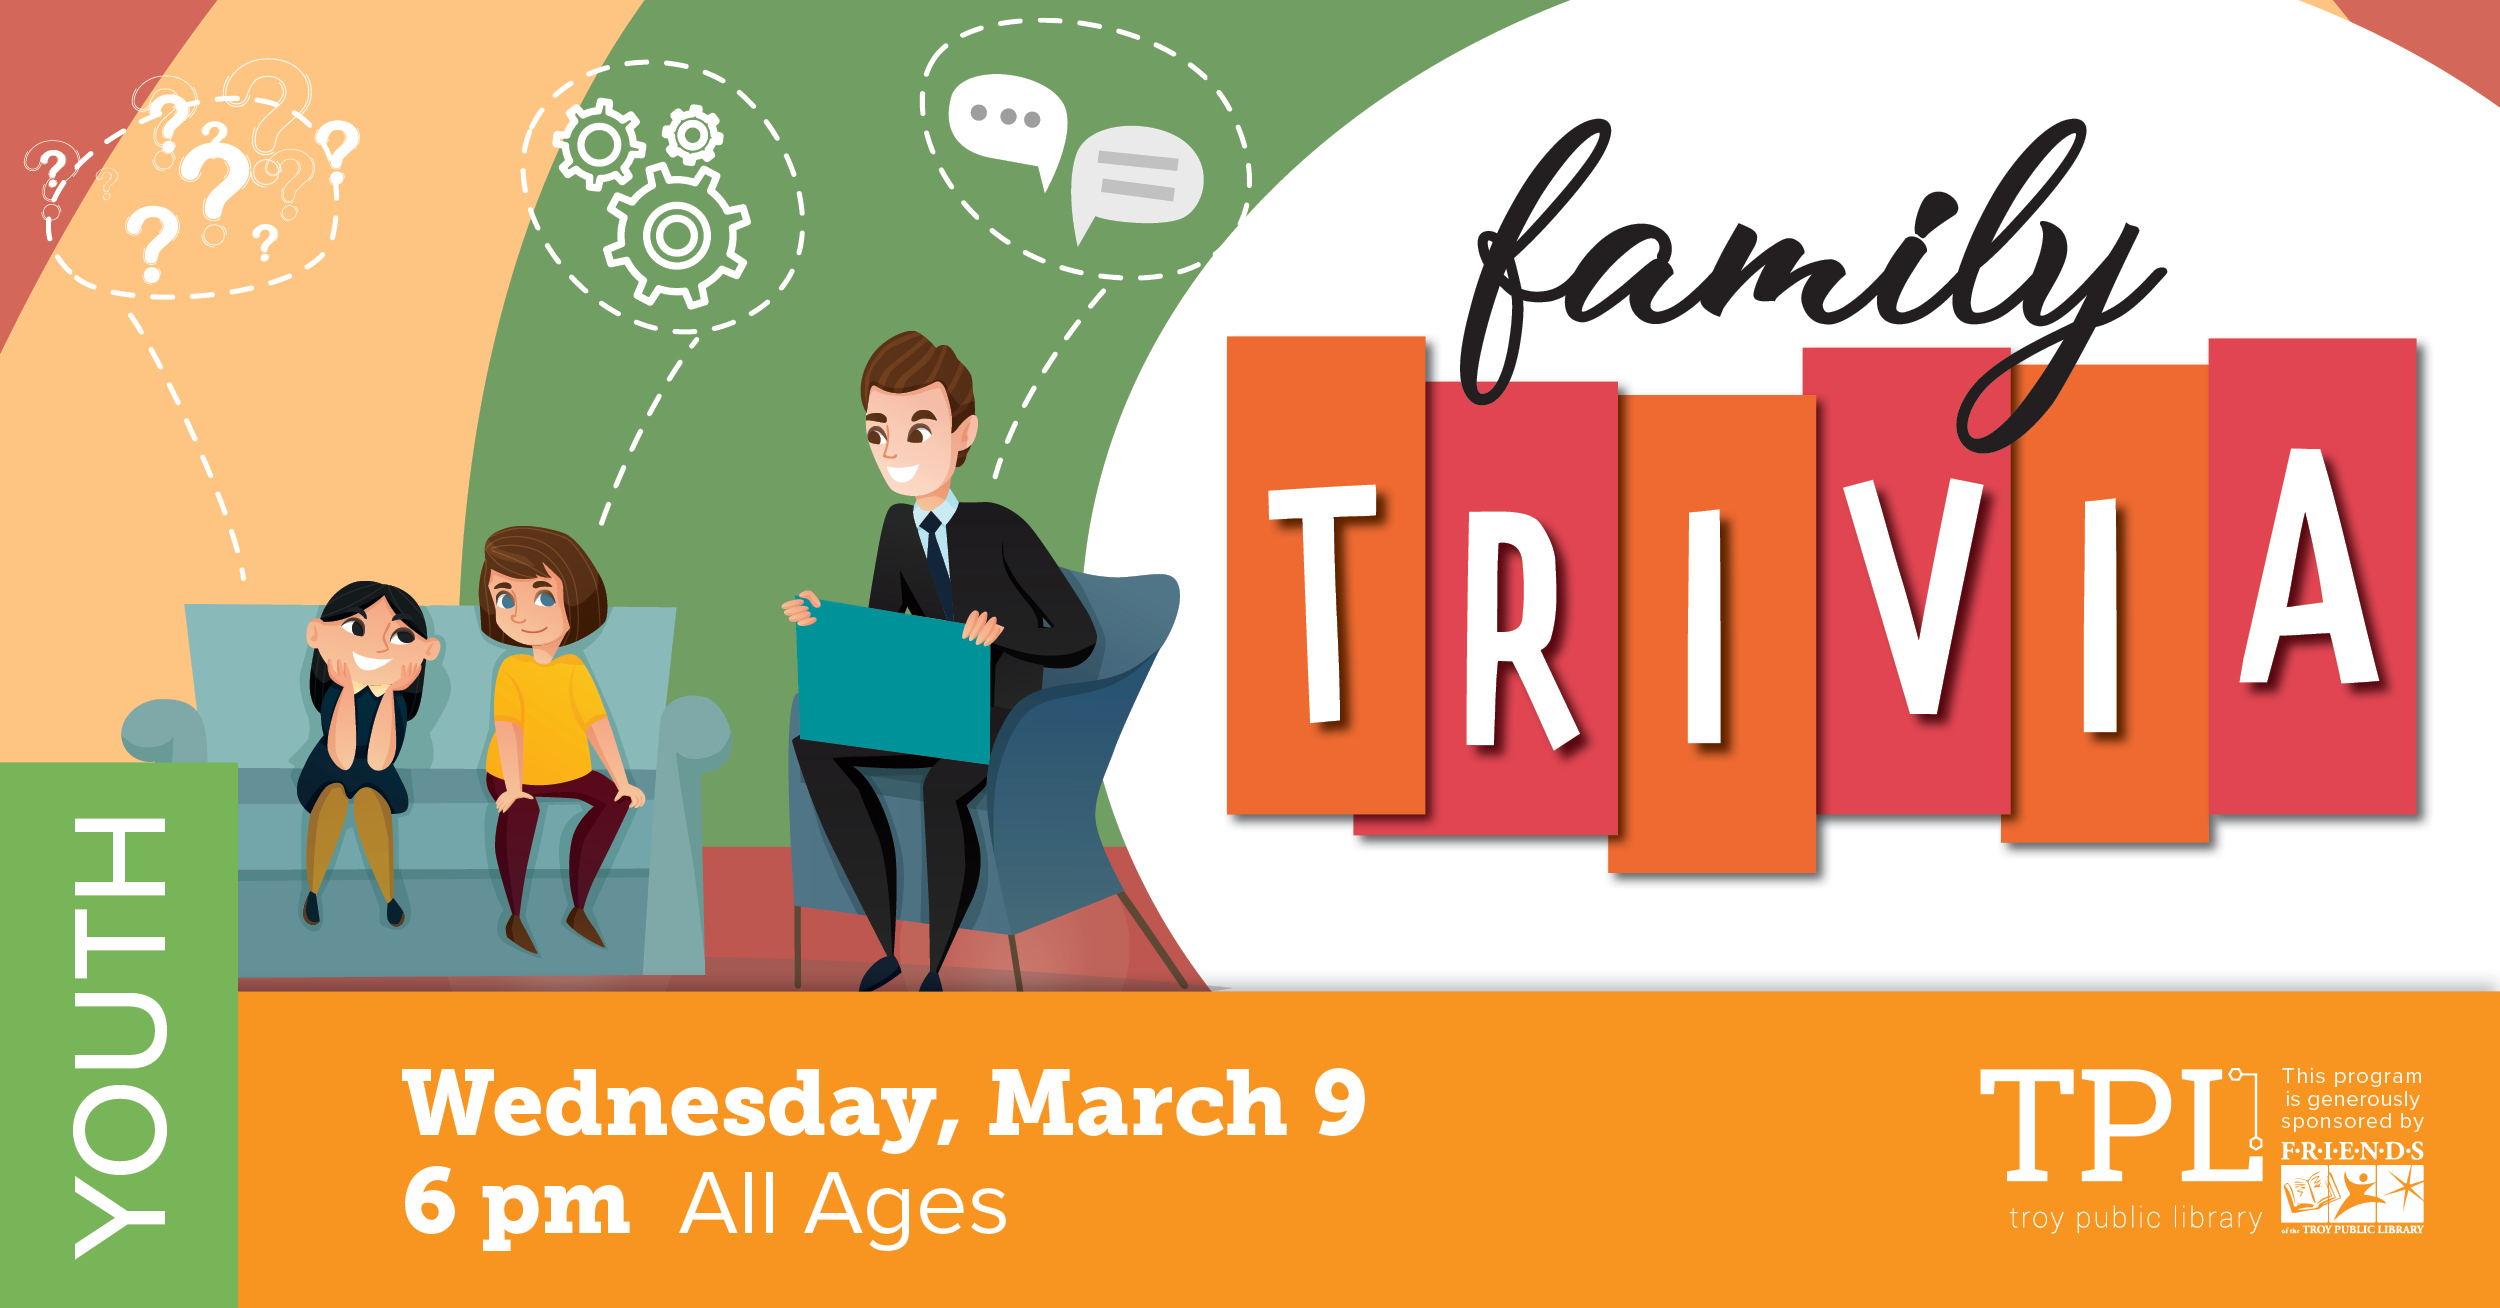 Family Trivia Wednesday, March 9 6pm. All Ages. Sponsored by the Friends of the Troy Public Library